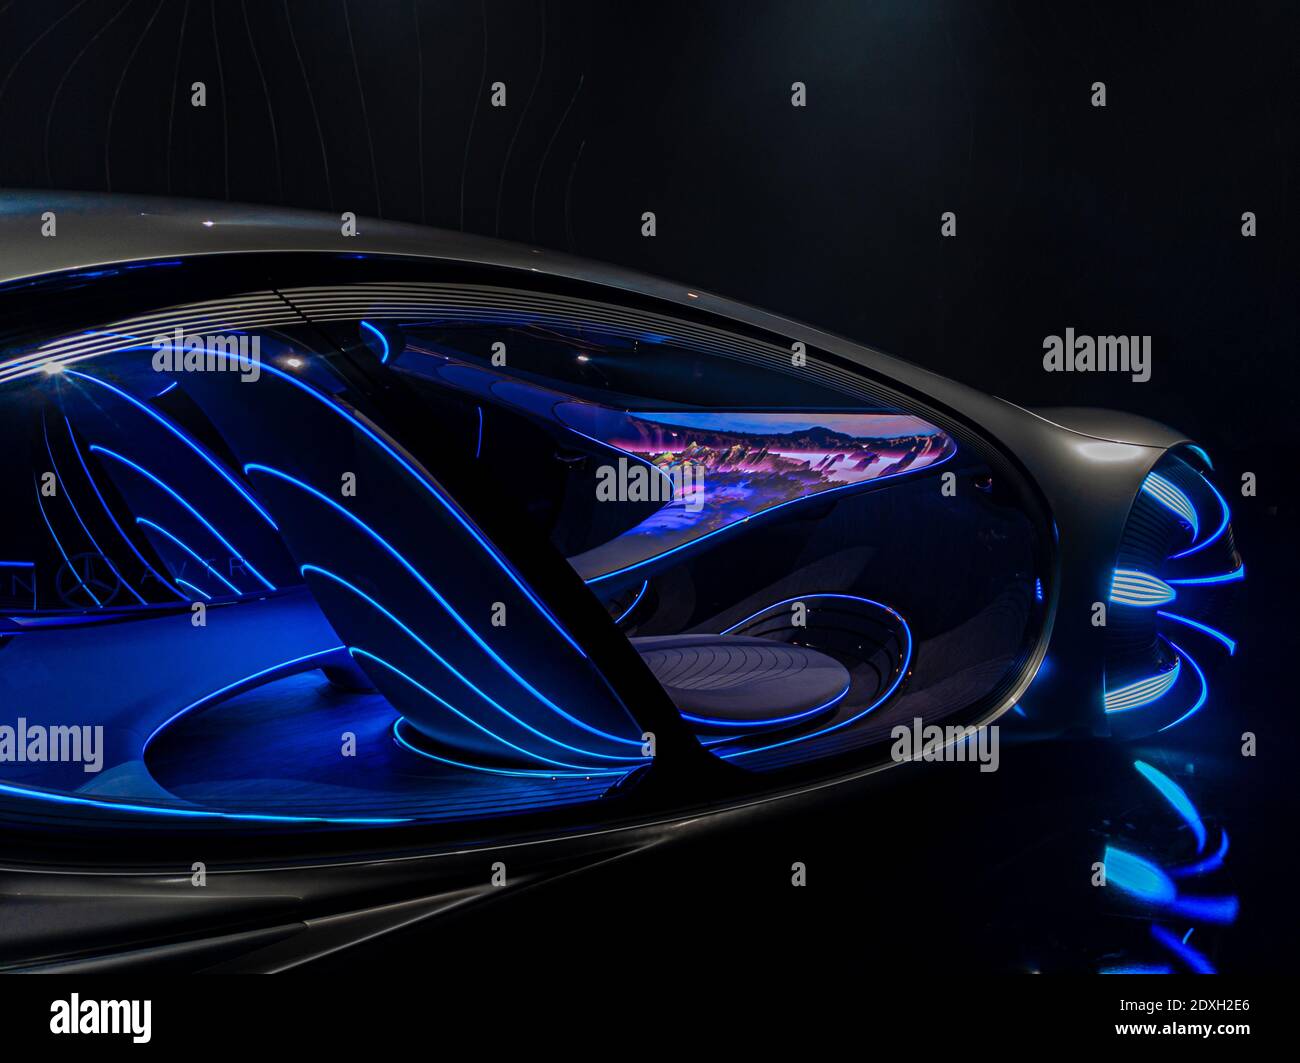 Las Vegas, NV - January 9, 2020: Looking inside the Mercedes-Benz VISION AVTR Concept Car at Consumer Electronics Show 2020 Stock Photo